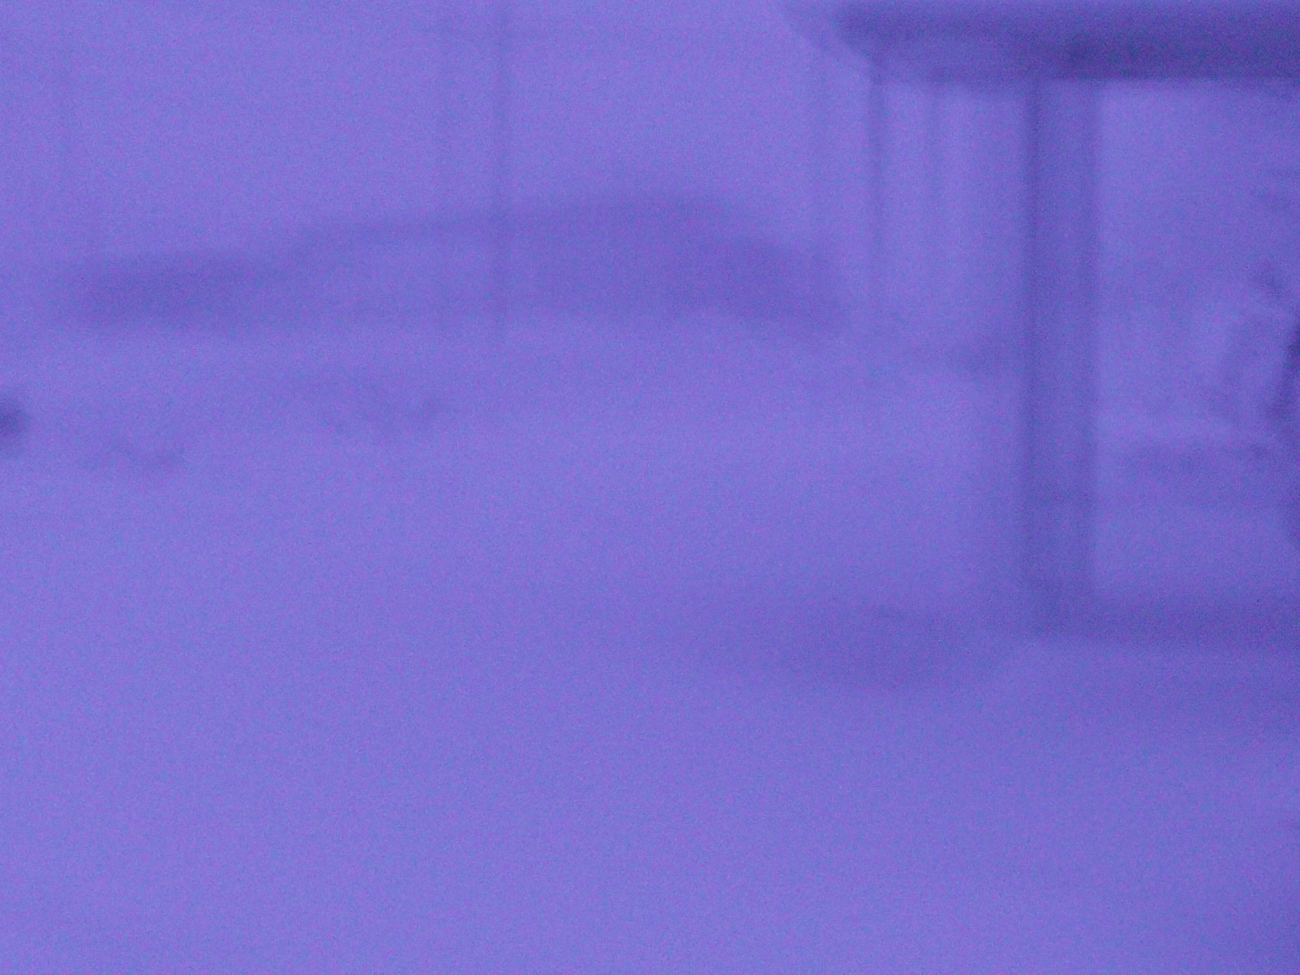 White-out conditions during blizzard